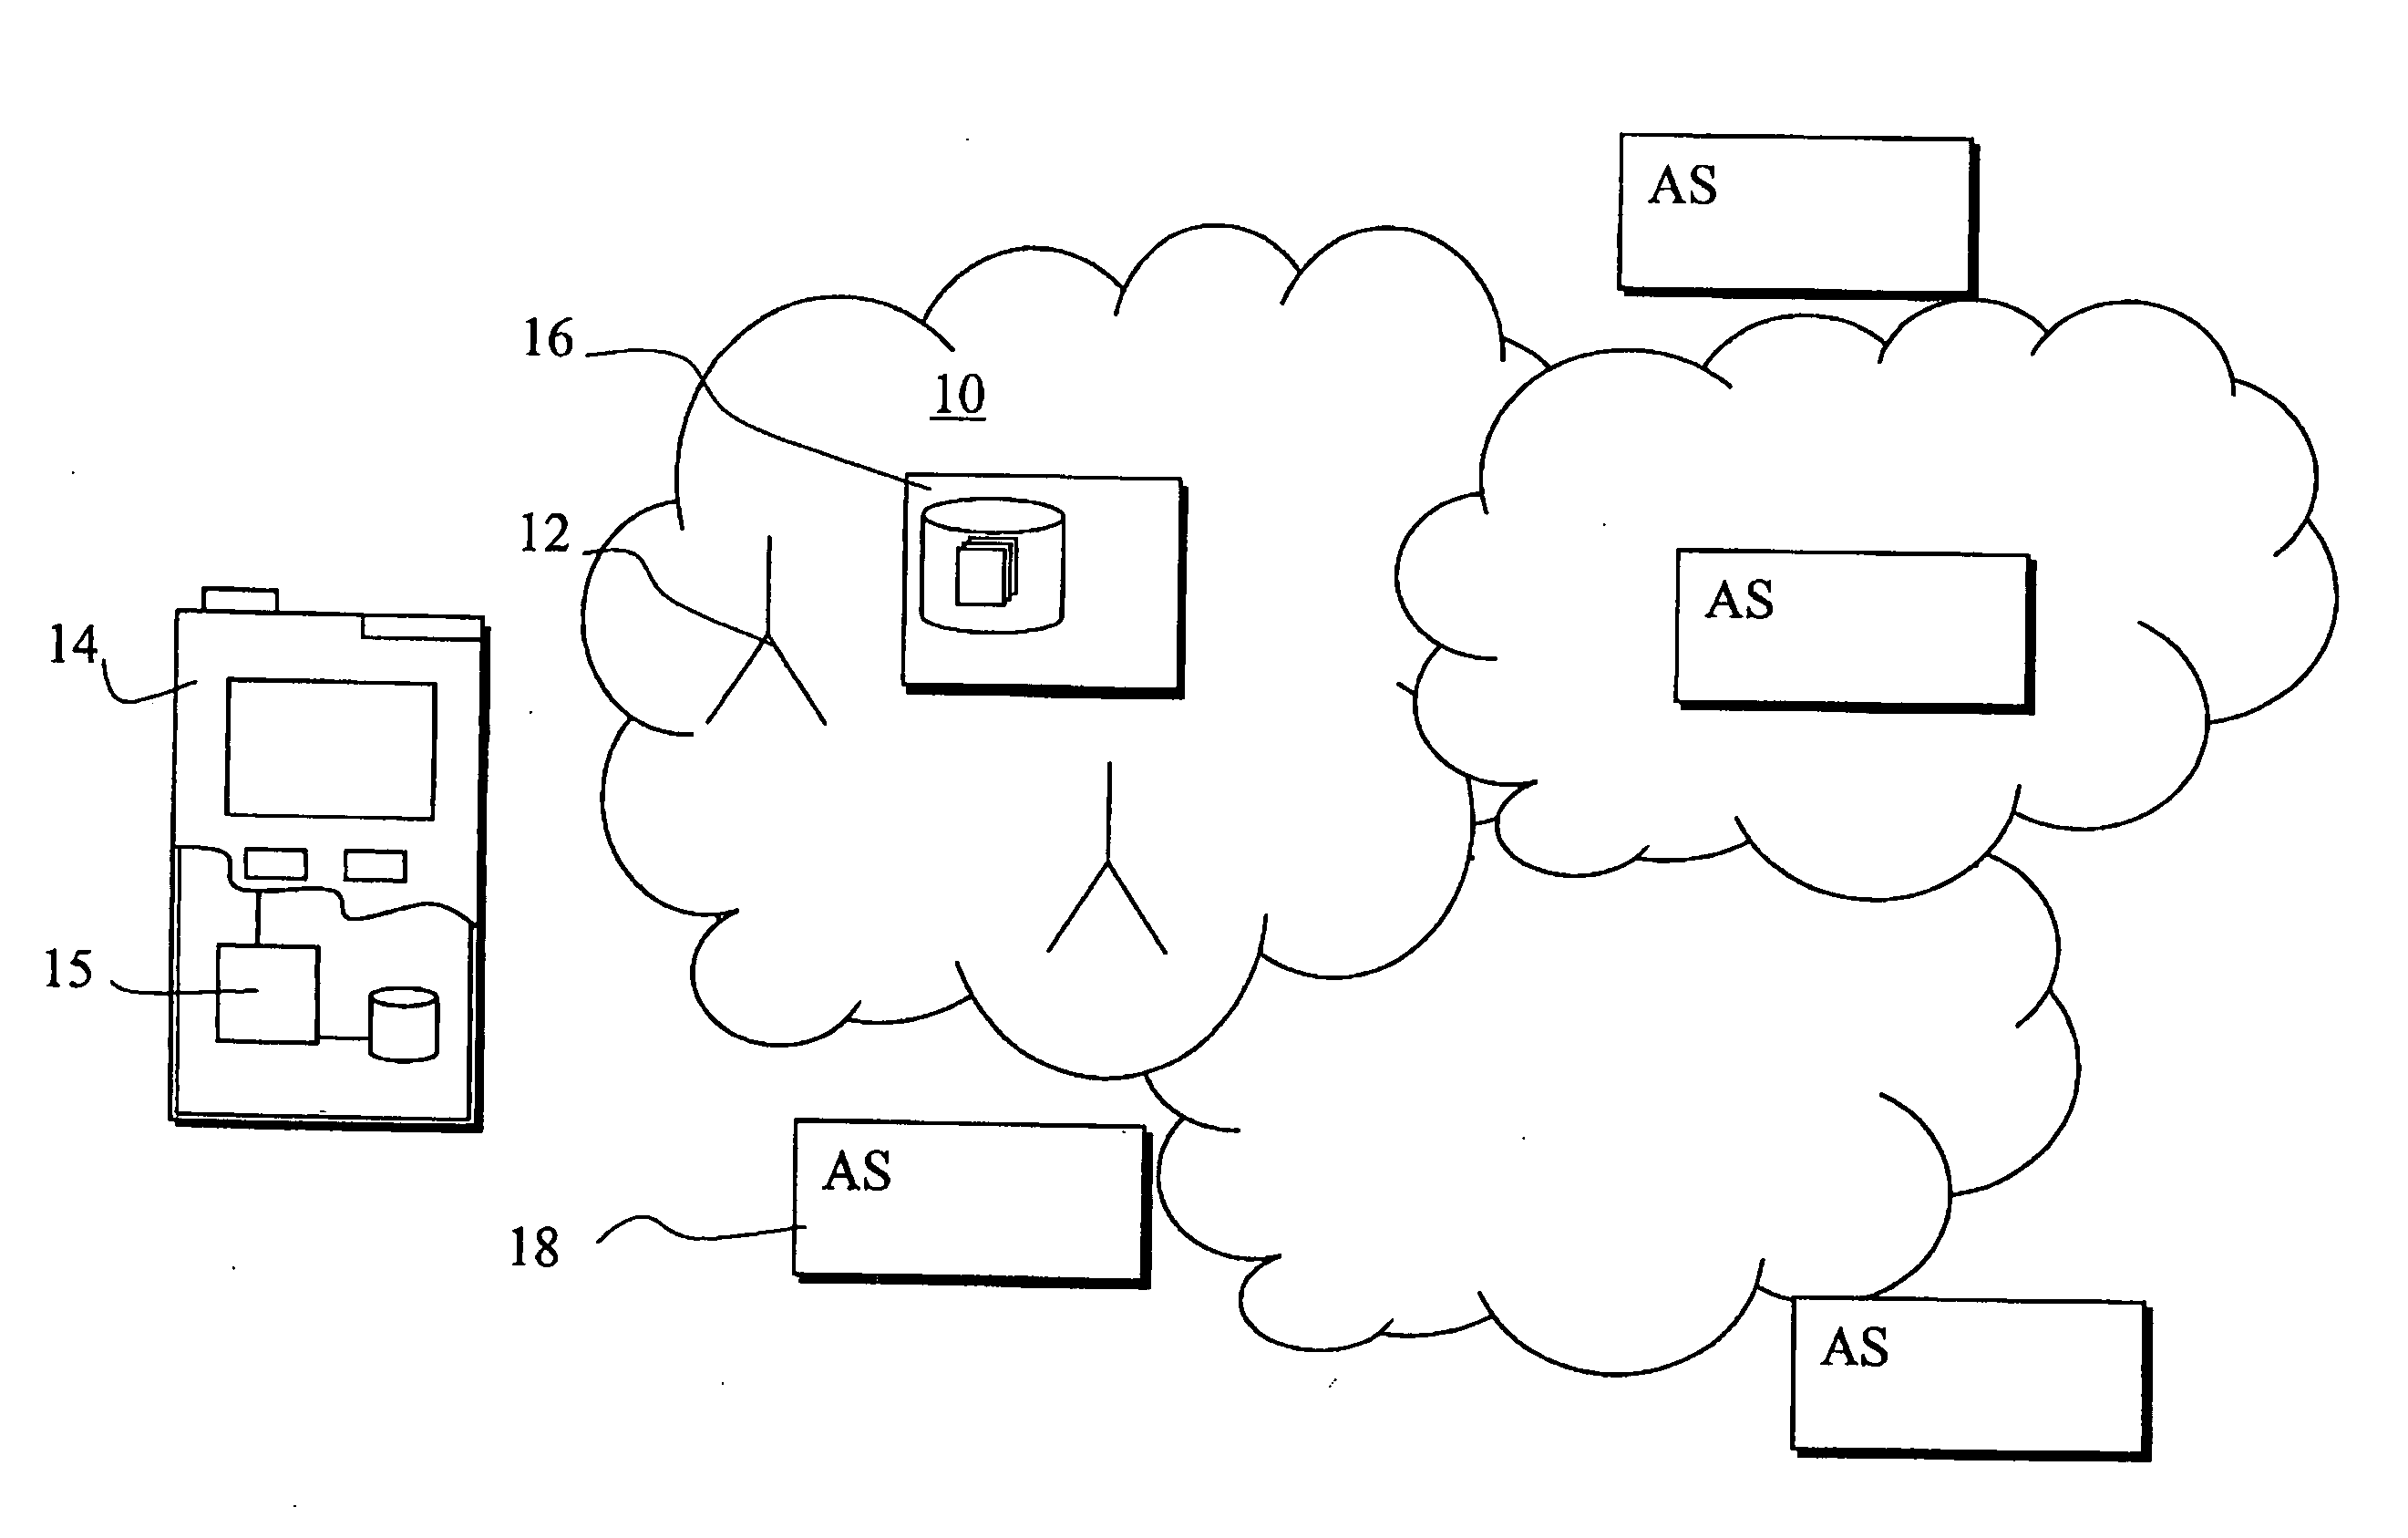 User authentication in a communications system